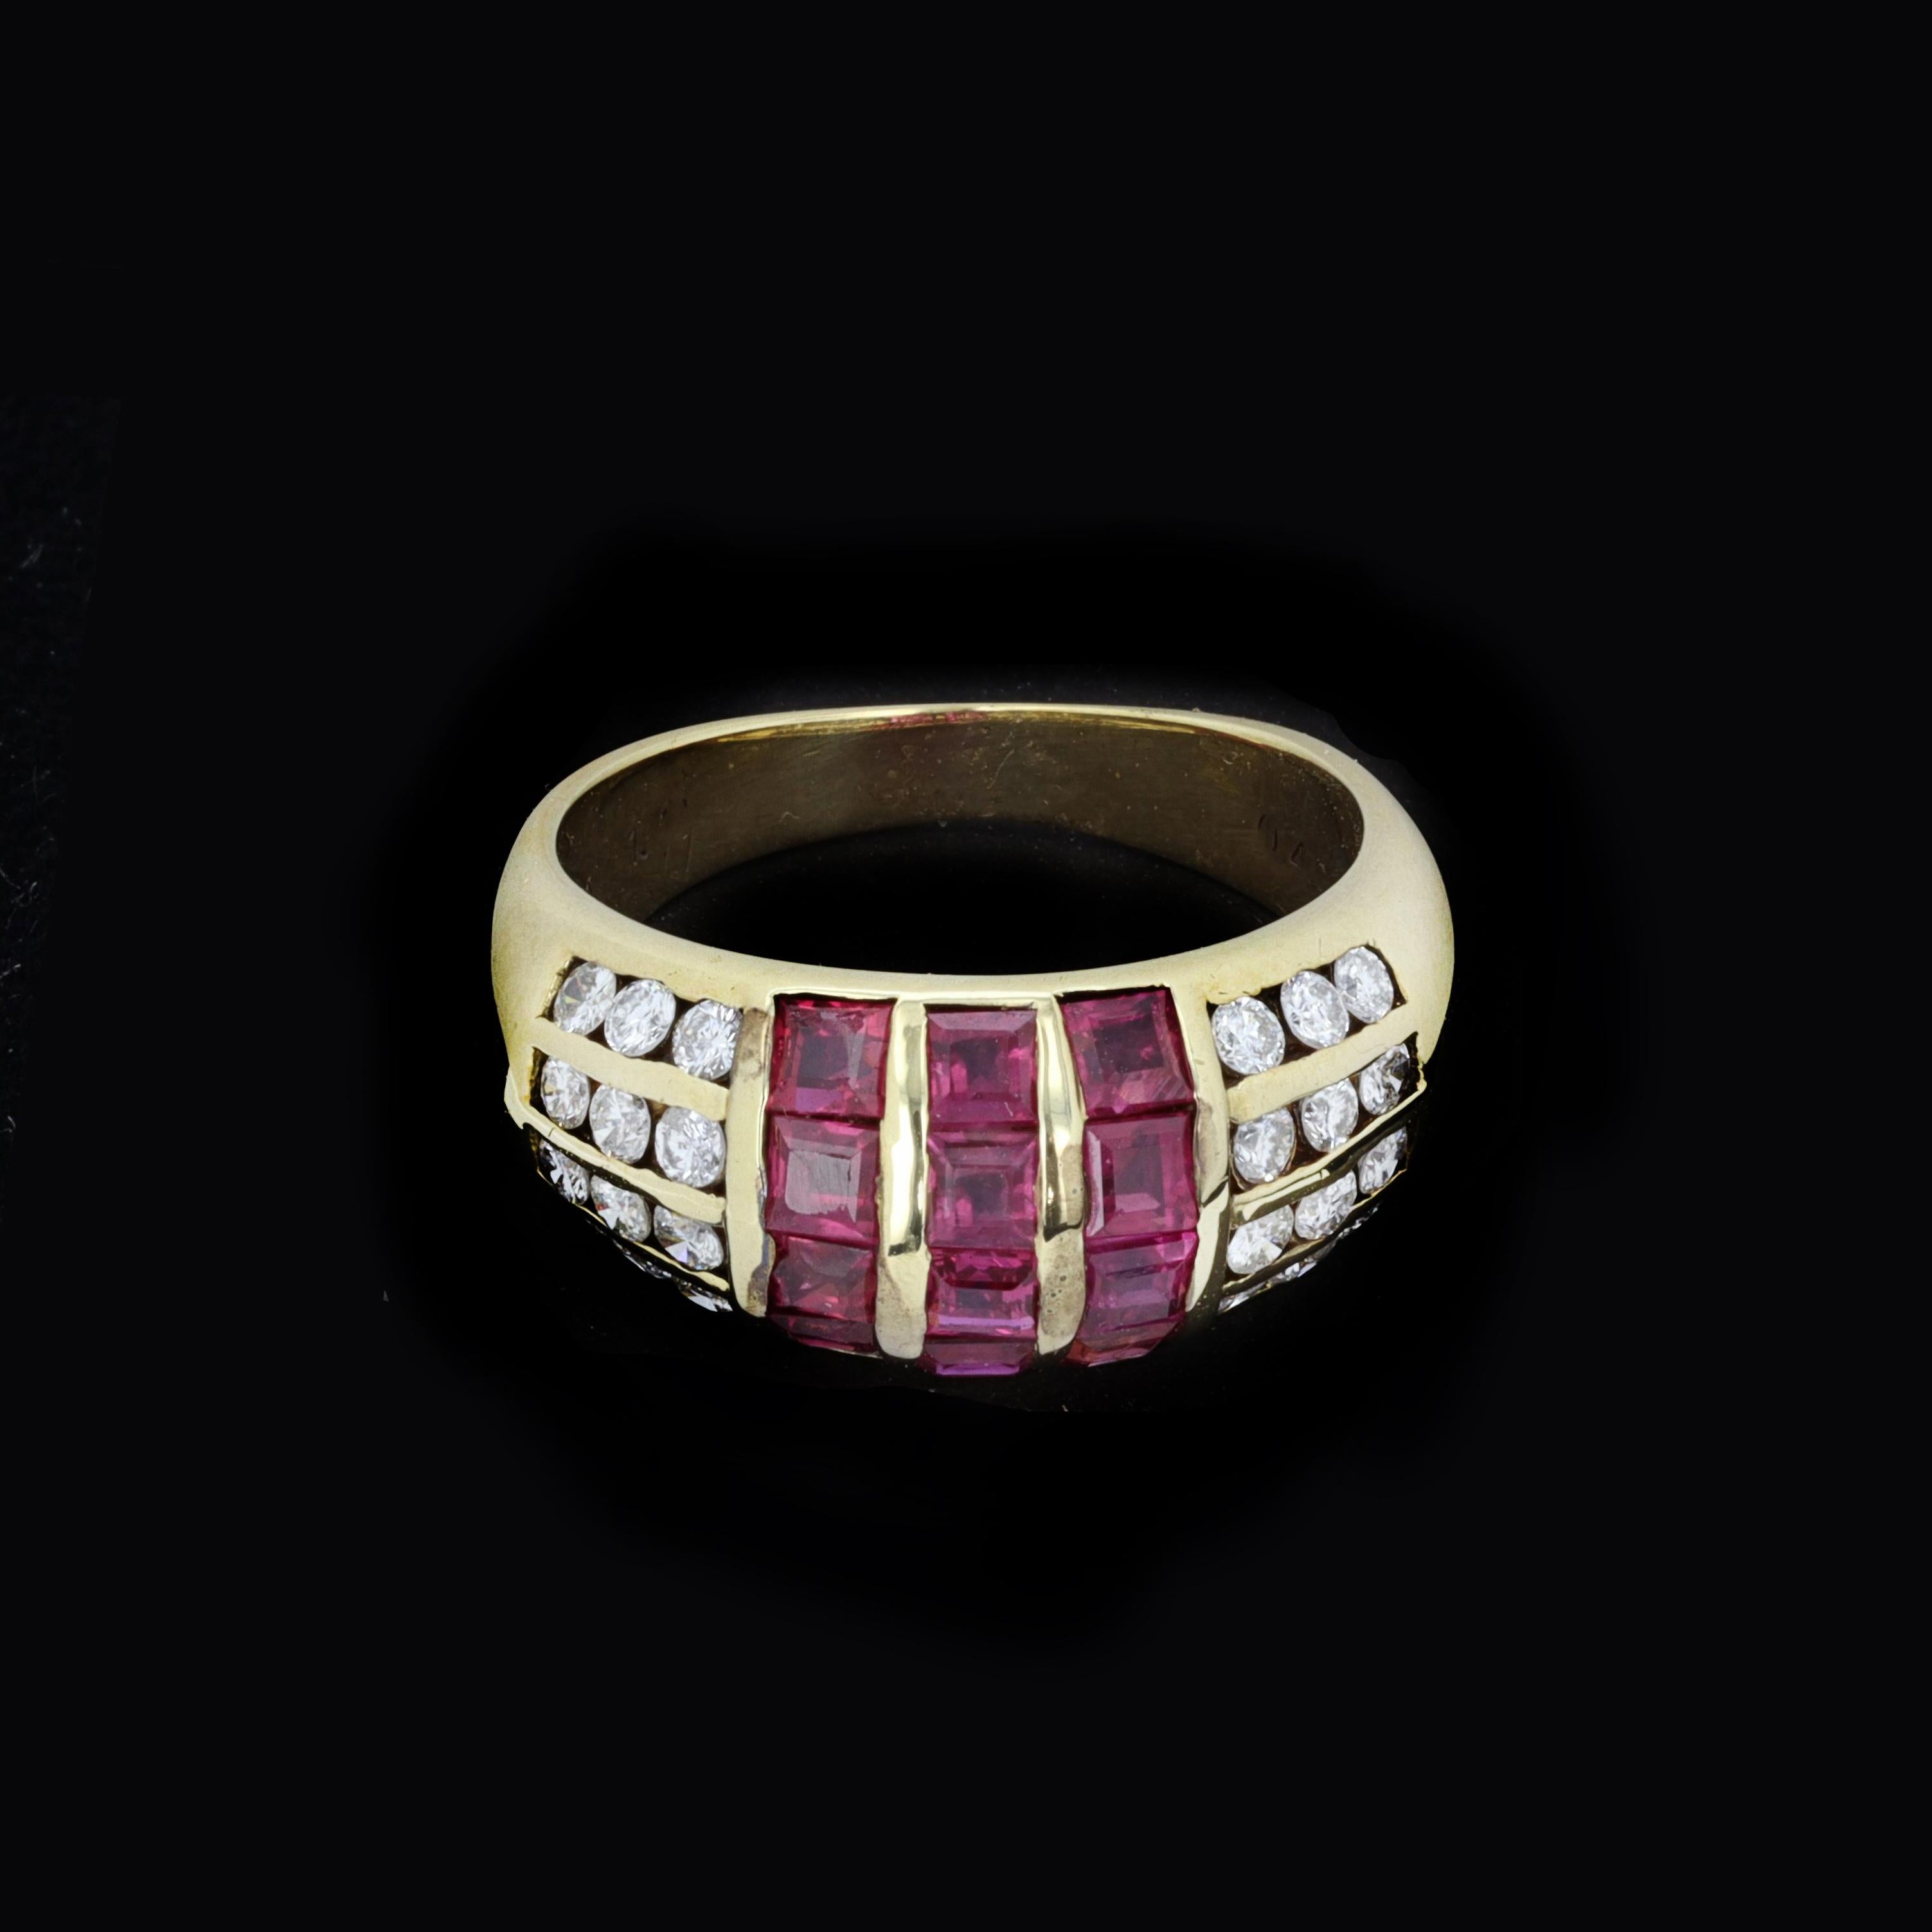 Columns of deep red rubies are framed by rows of bright diamonds in the striking geometric design of this estate ring. Set in polished 14 K yellow gold. 

The approximately 12 square-cut rubies weigh approximately 1.00 carat in total. The 24 round